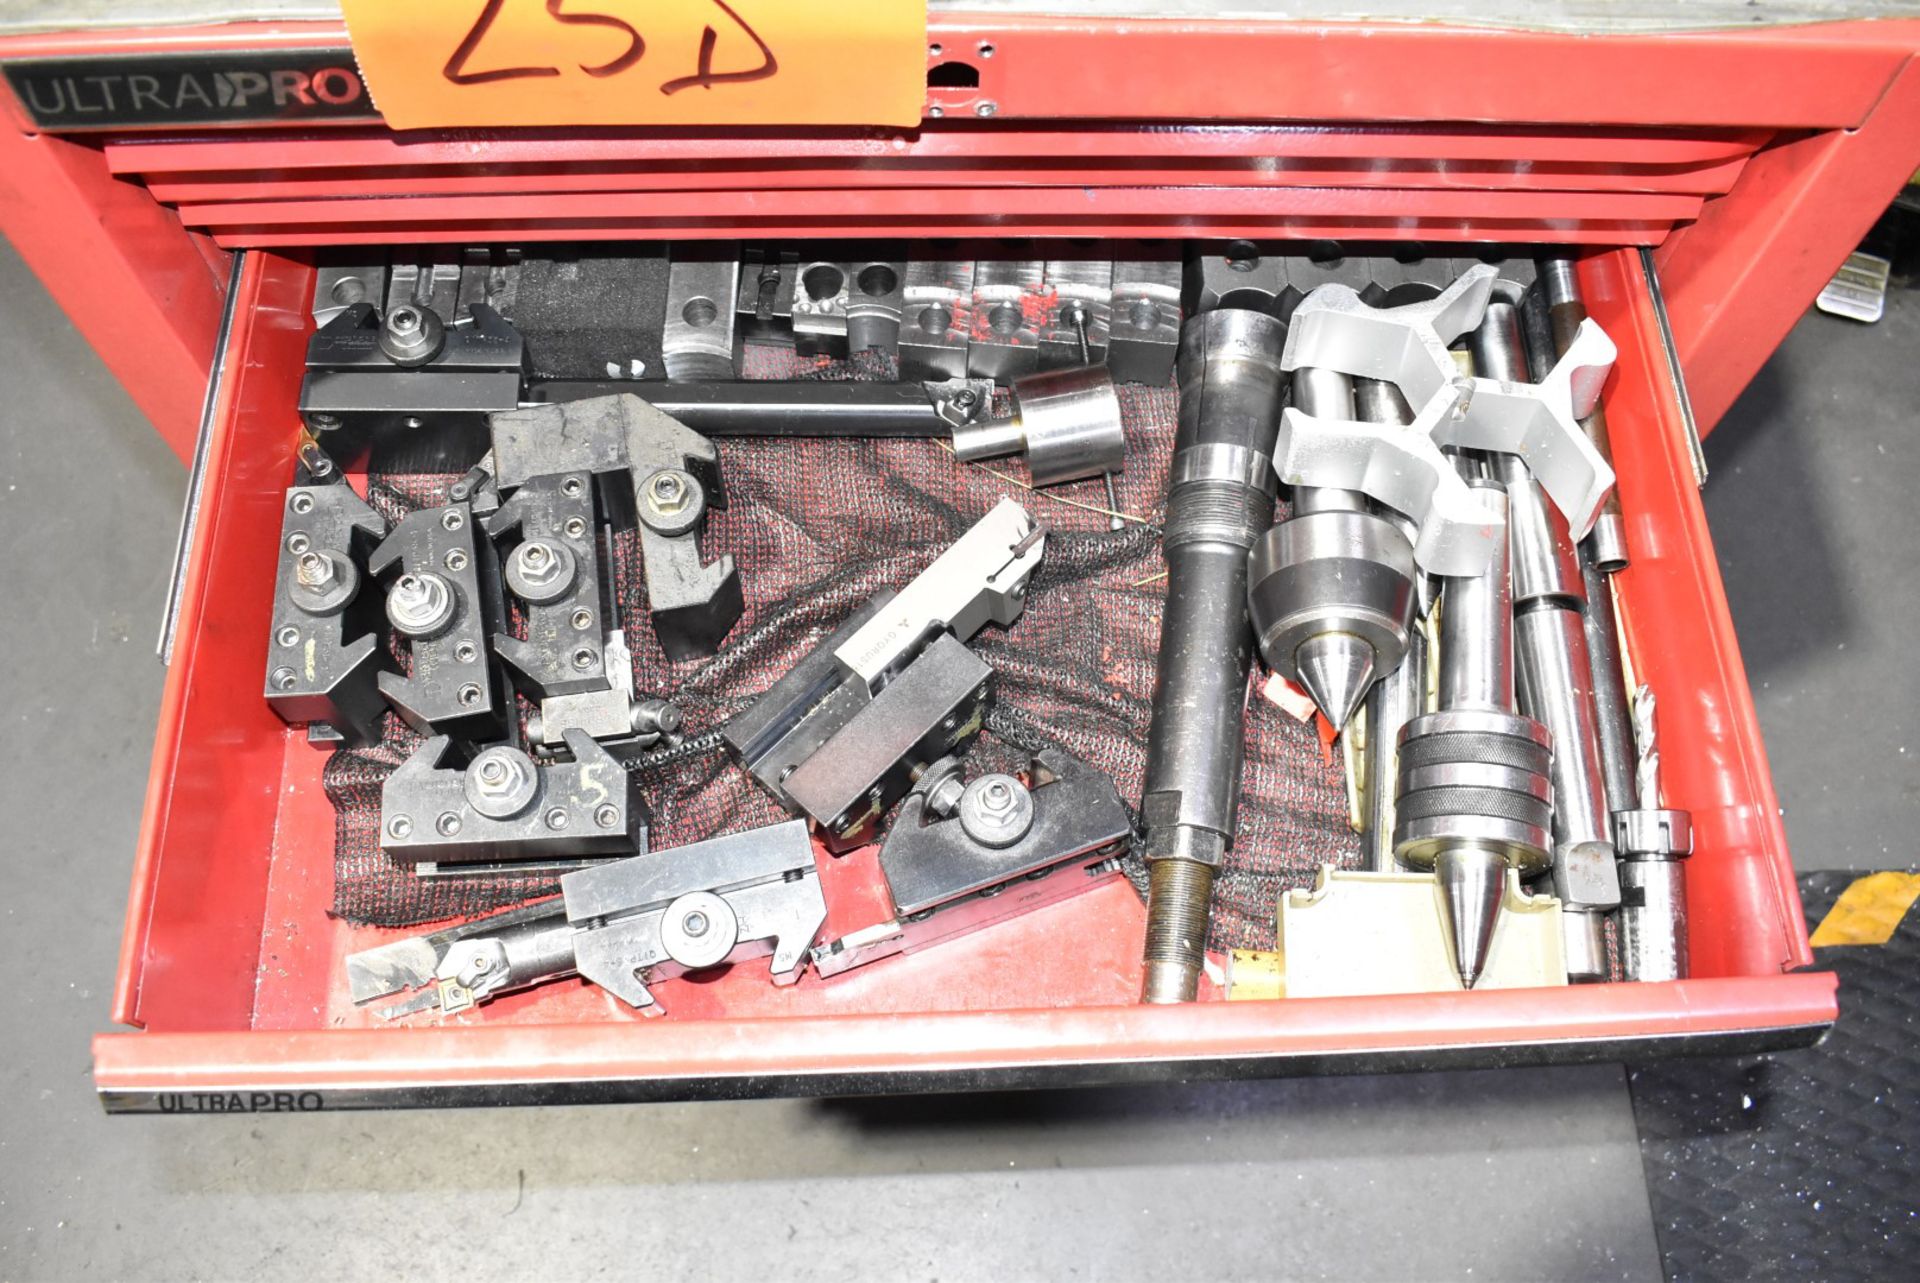 LOT/ ULTRA PRO ROLLING TOOLBOX WITH LATHE TOOLING, CHUCK JAWS & ACCESSORIES - Image 3 of 7